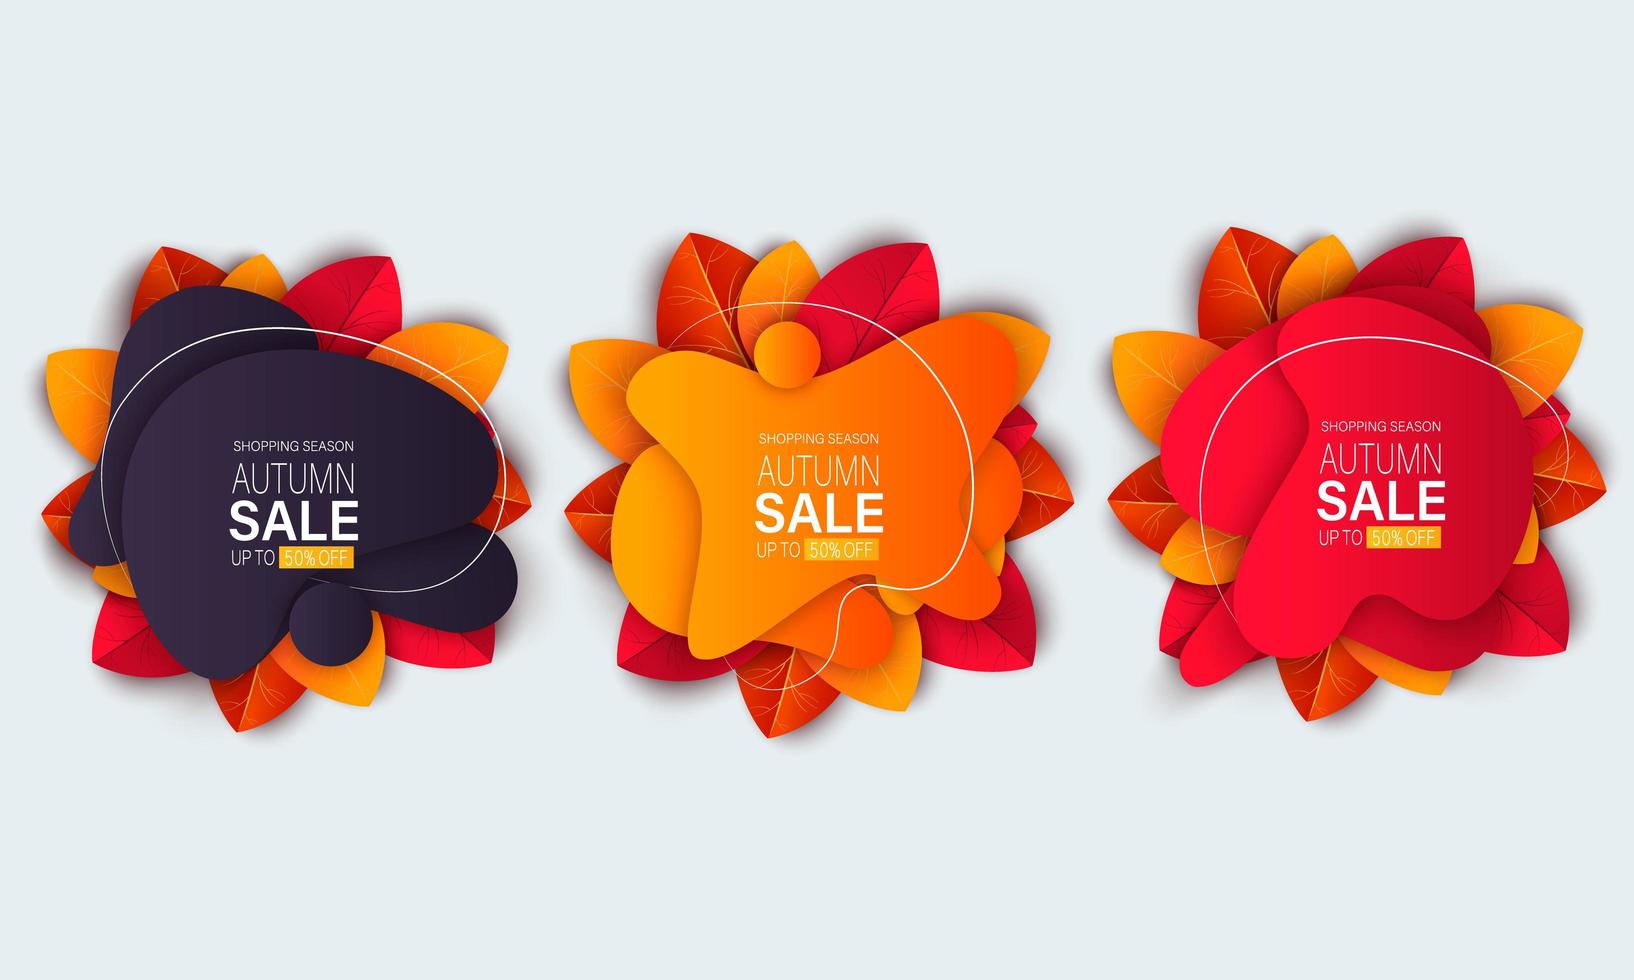 Autumn sale banners with leaves and liquid form shapes vector